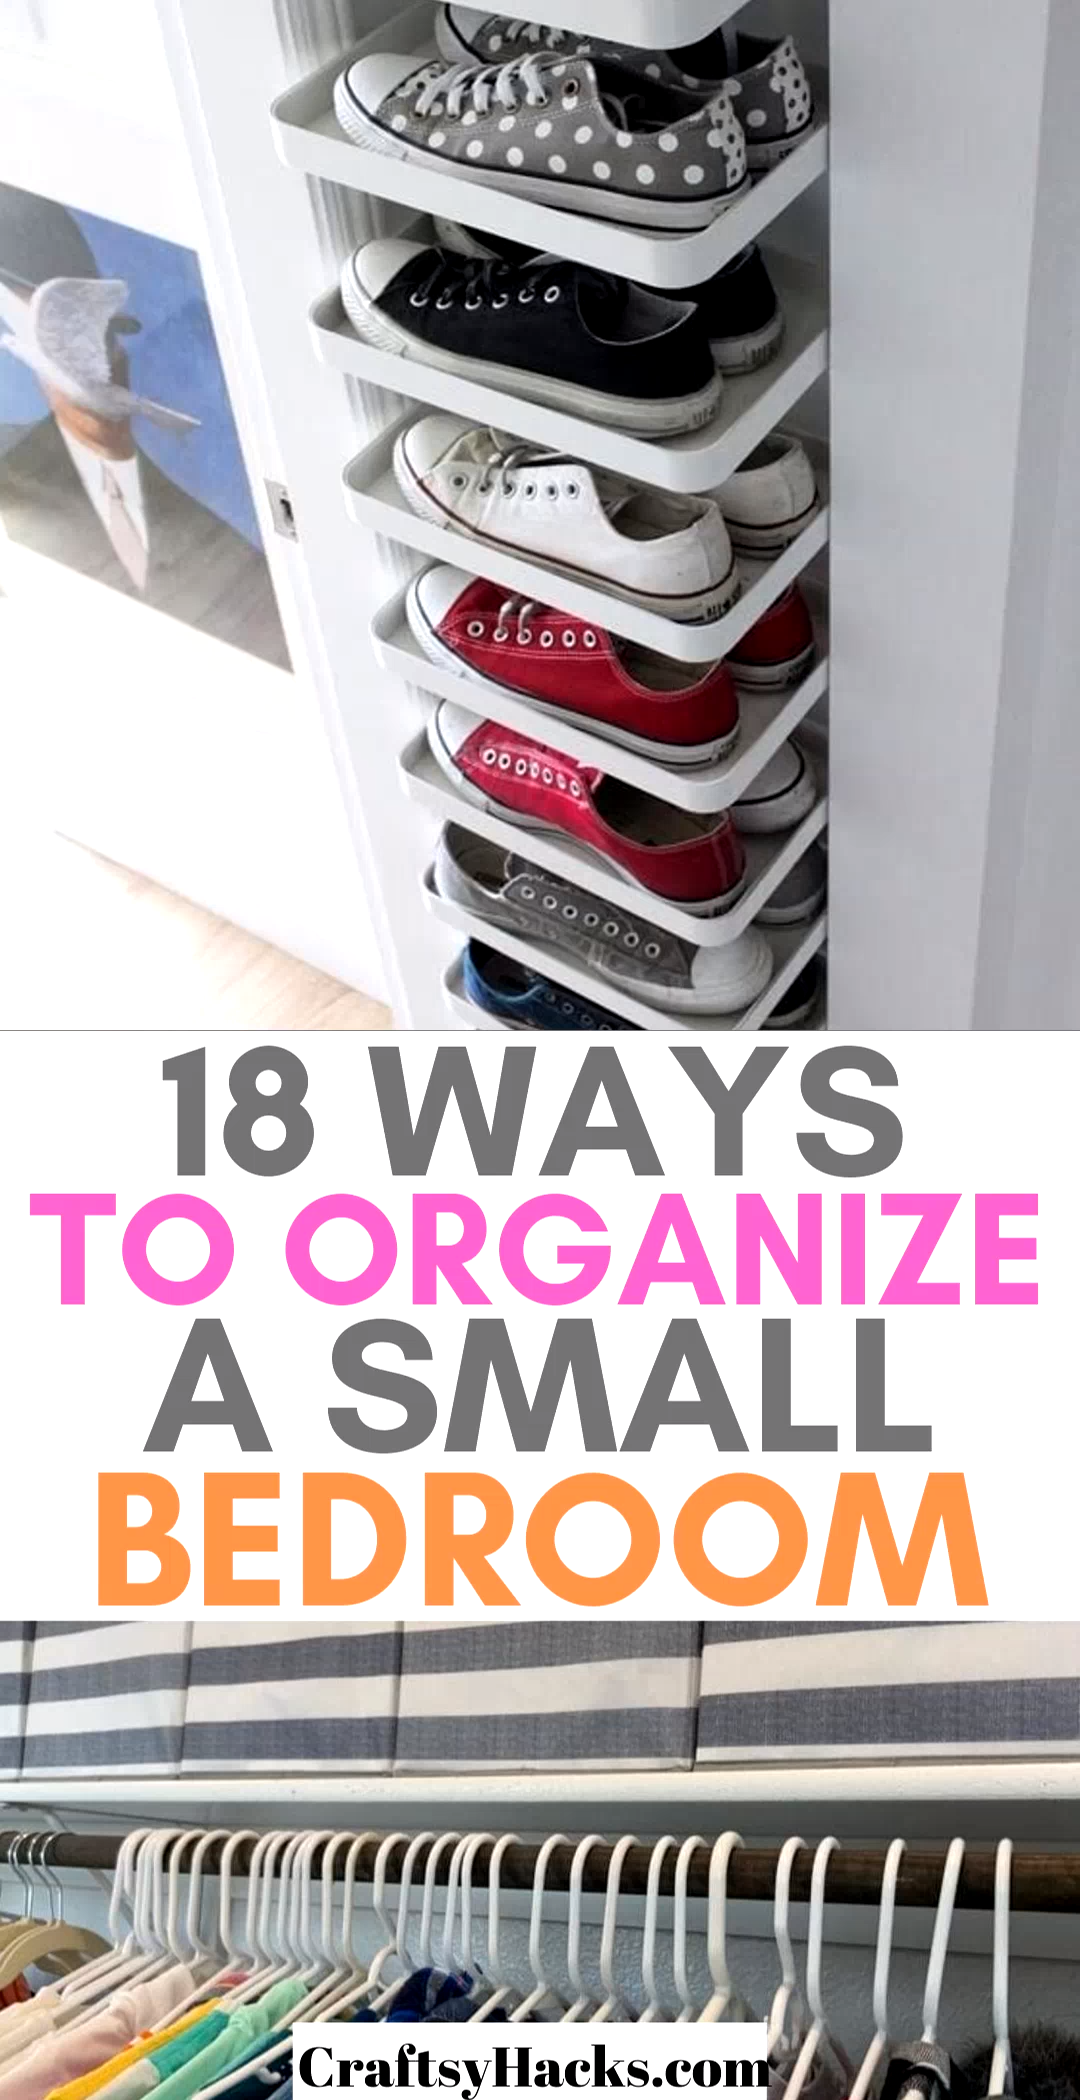 18 Ways to Organize a Small Bedroom - 18 Ways to Organize a Small Bedroom -   17 diy Organization chambre ideas